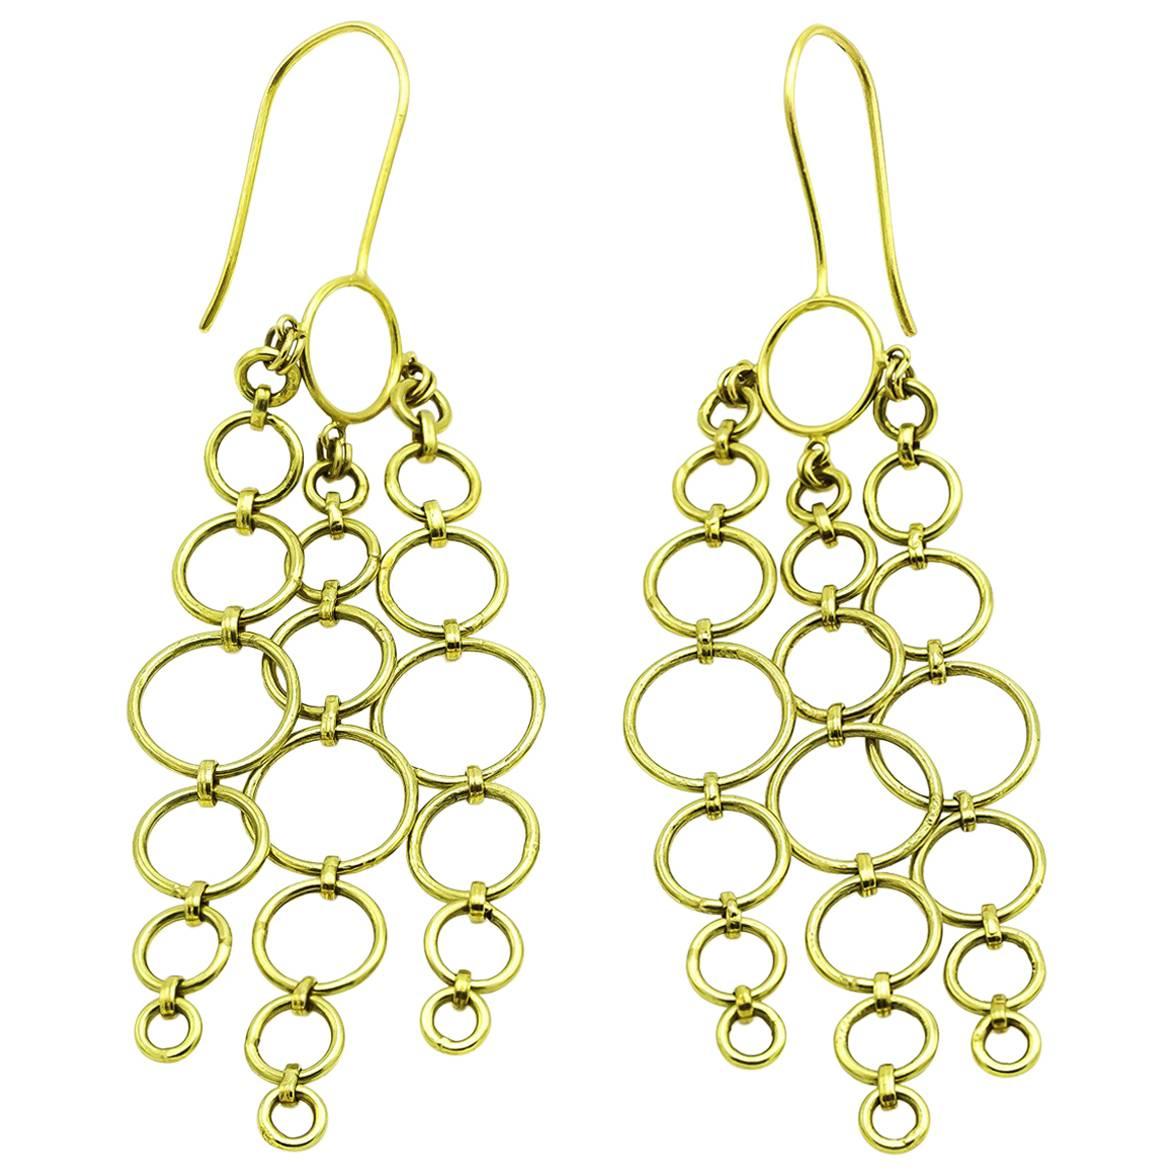 Gold Chandelier Earrings Made of Hoops and Circles in 18 Karat Gold